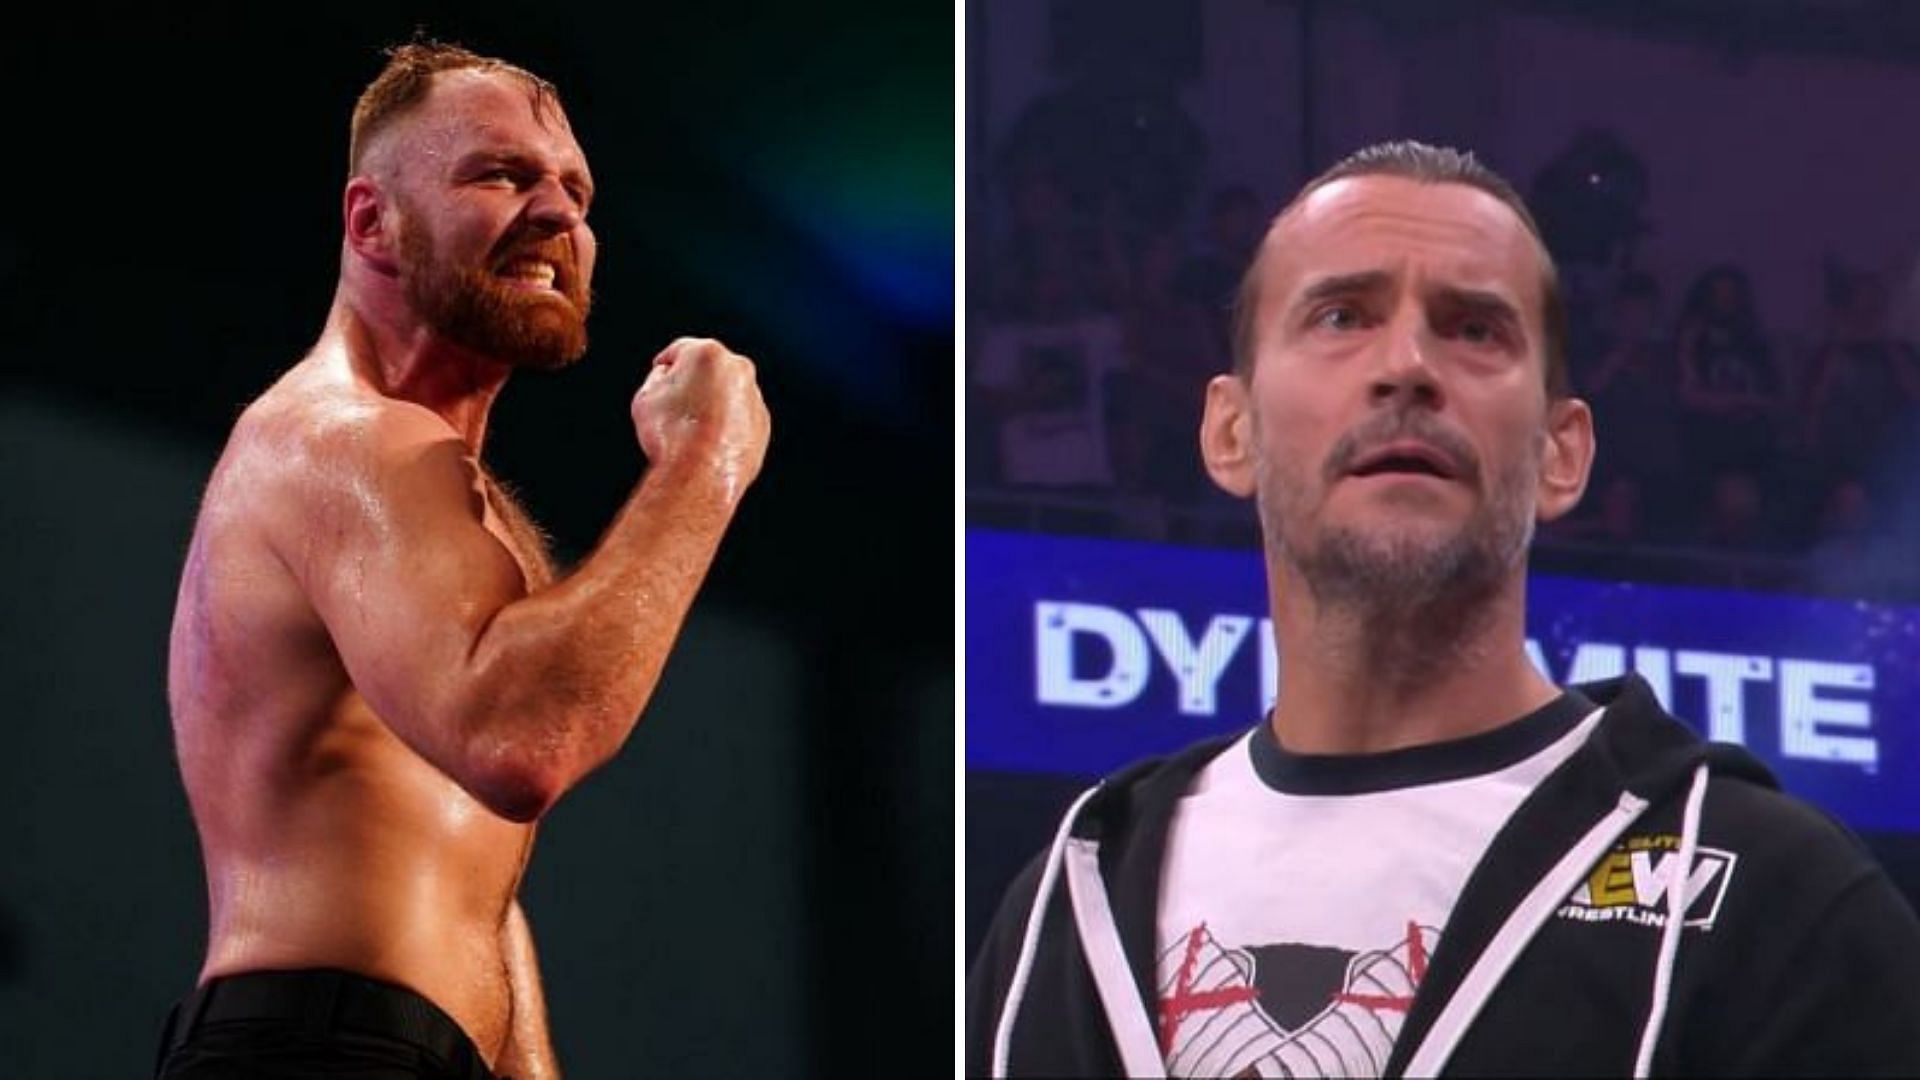 Jon Moxley and CM Punk could be in action at AEW Full Gear 2021